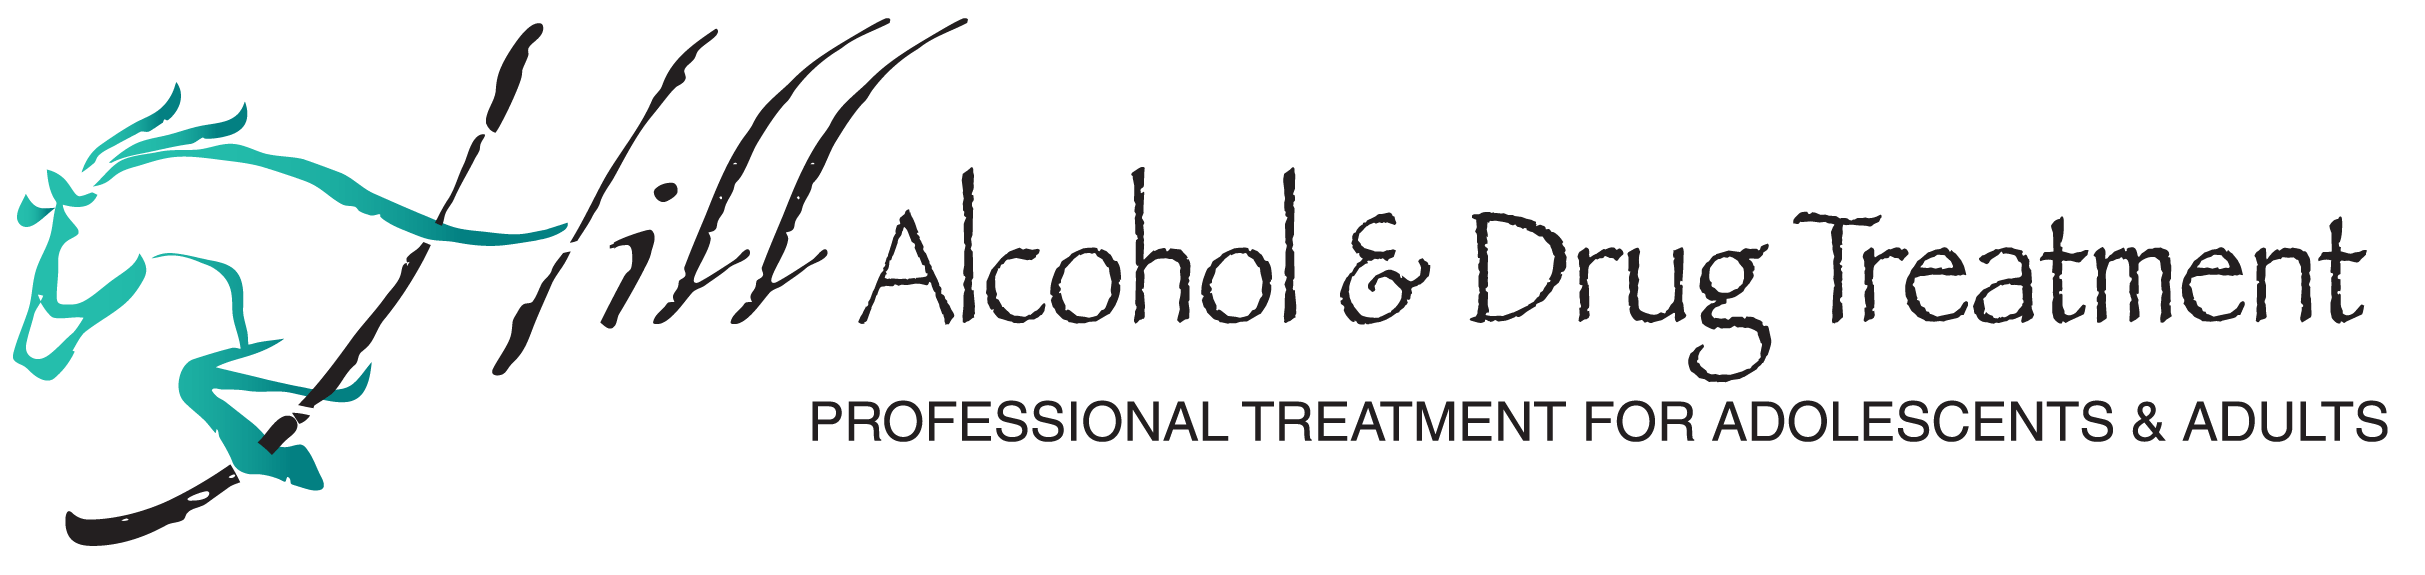 Hill Alcohol and Drug Treatment Center in Temecula CA